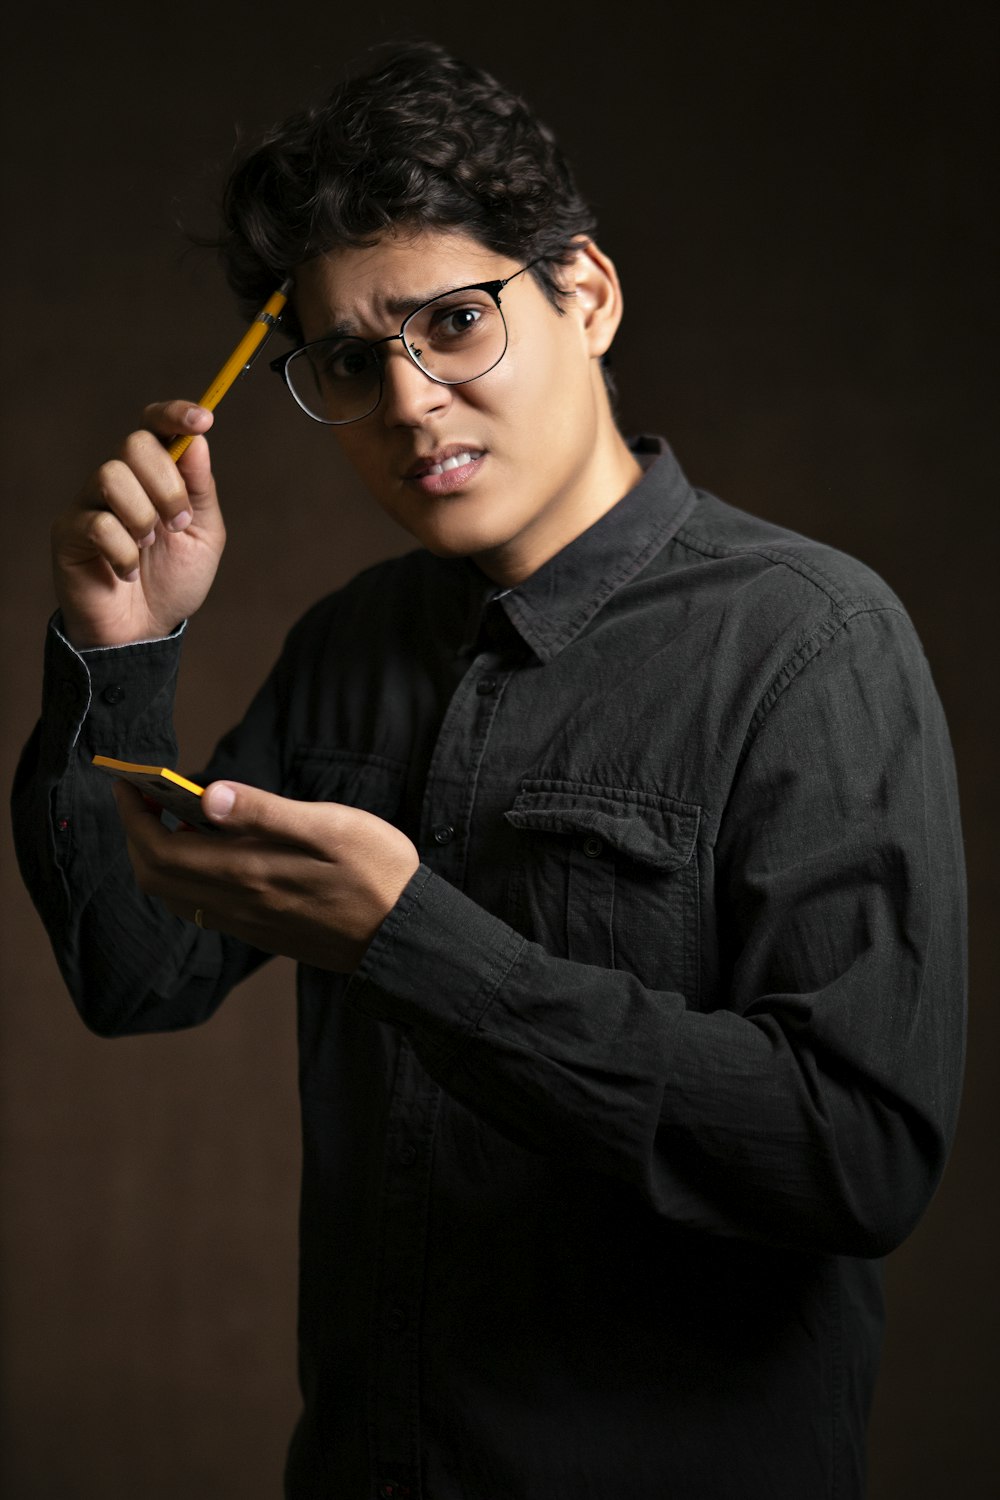 man wearing black denim jacket holding pencil and yellow sticky notes standing while showing confused reaction